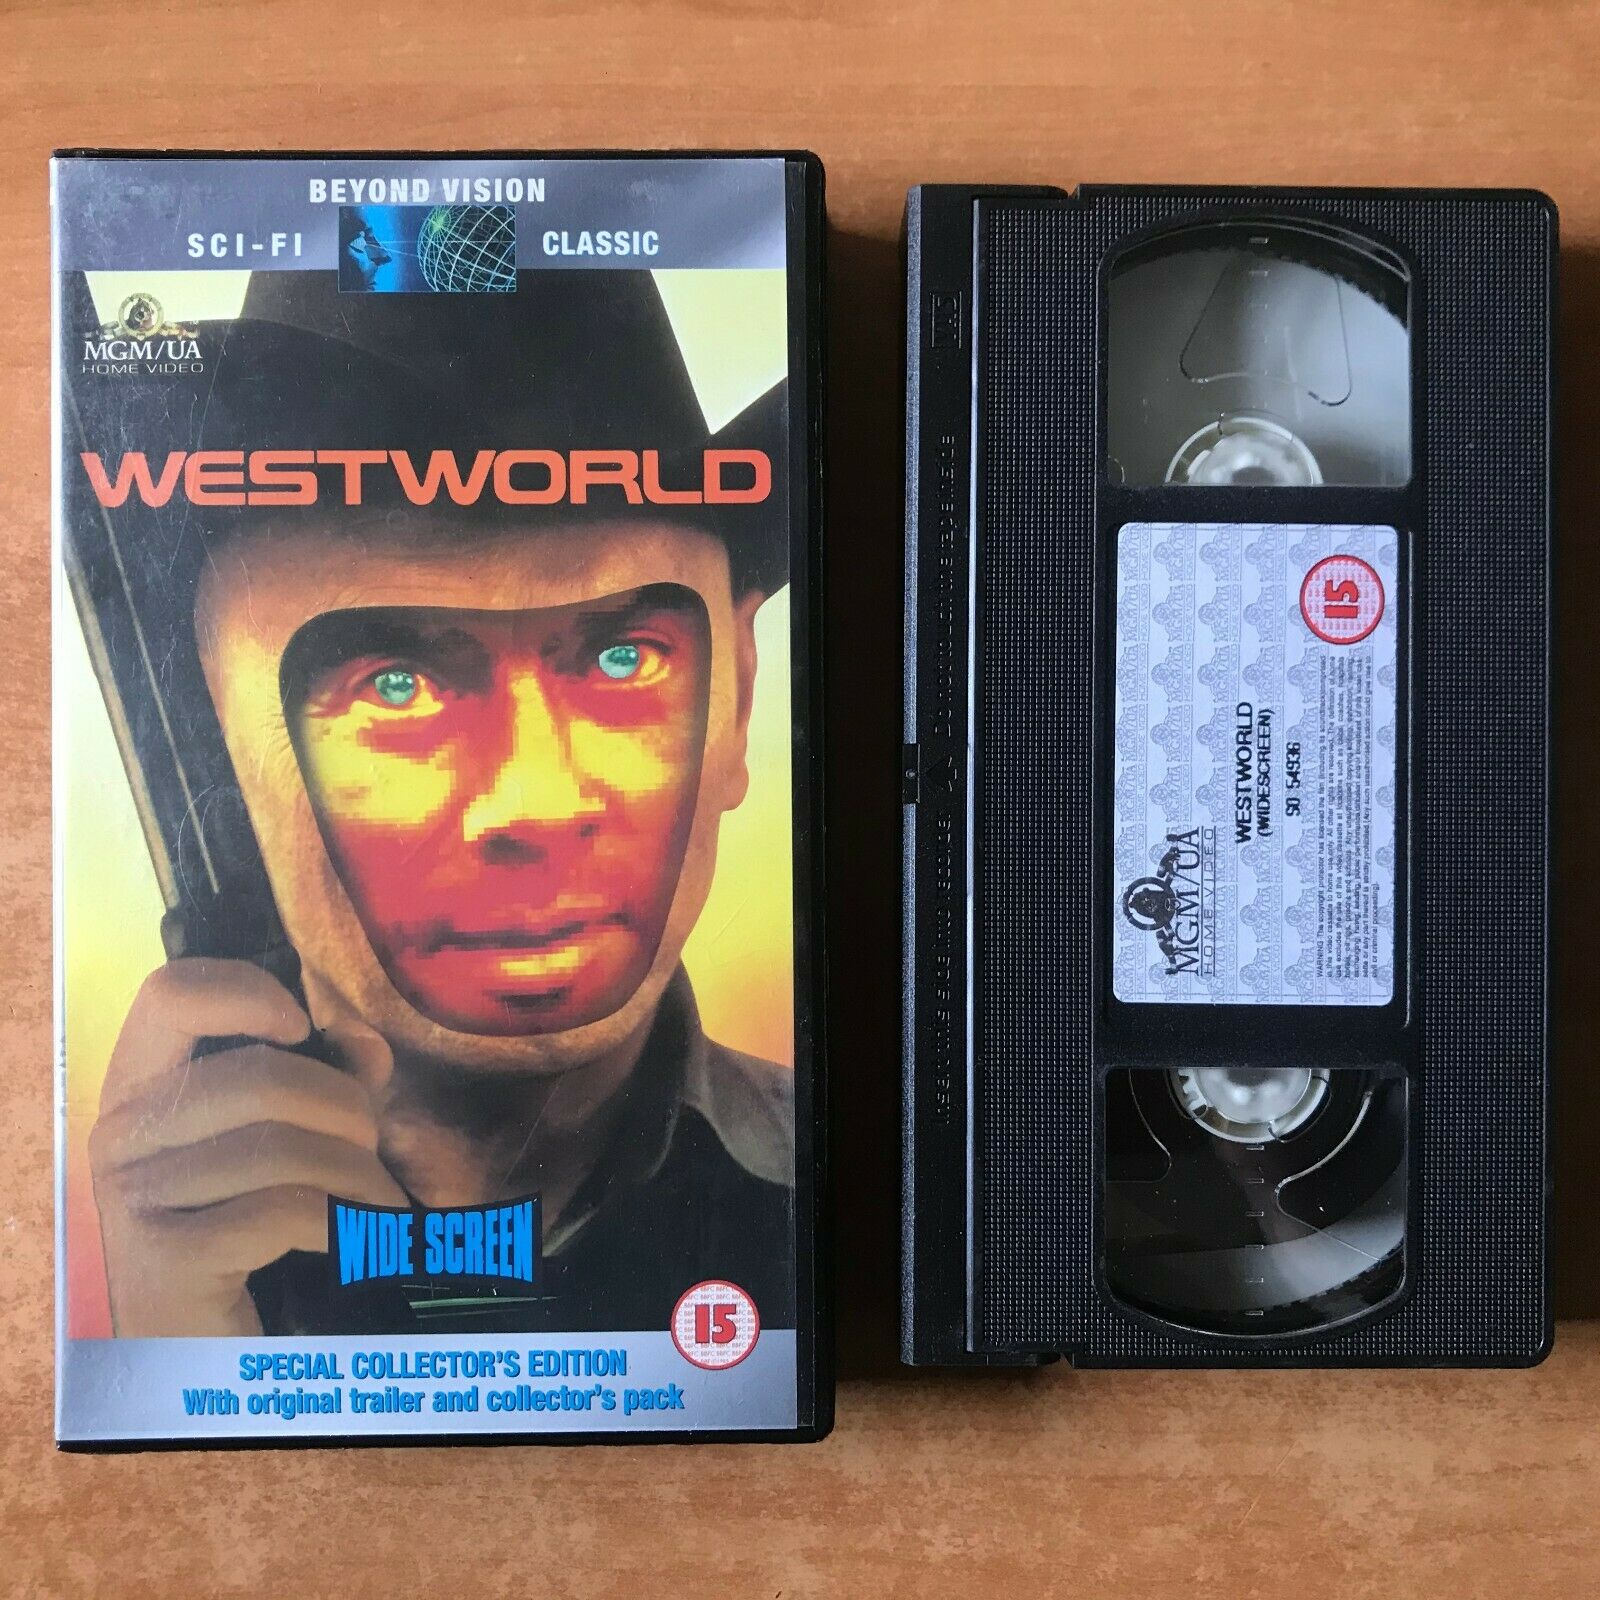 Westworld; [Widescreen] Collector's Edition; Sci-Fi Action - Yul Brynner - VHS-